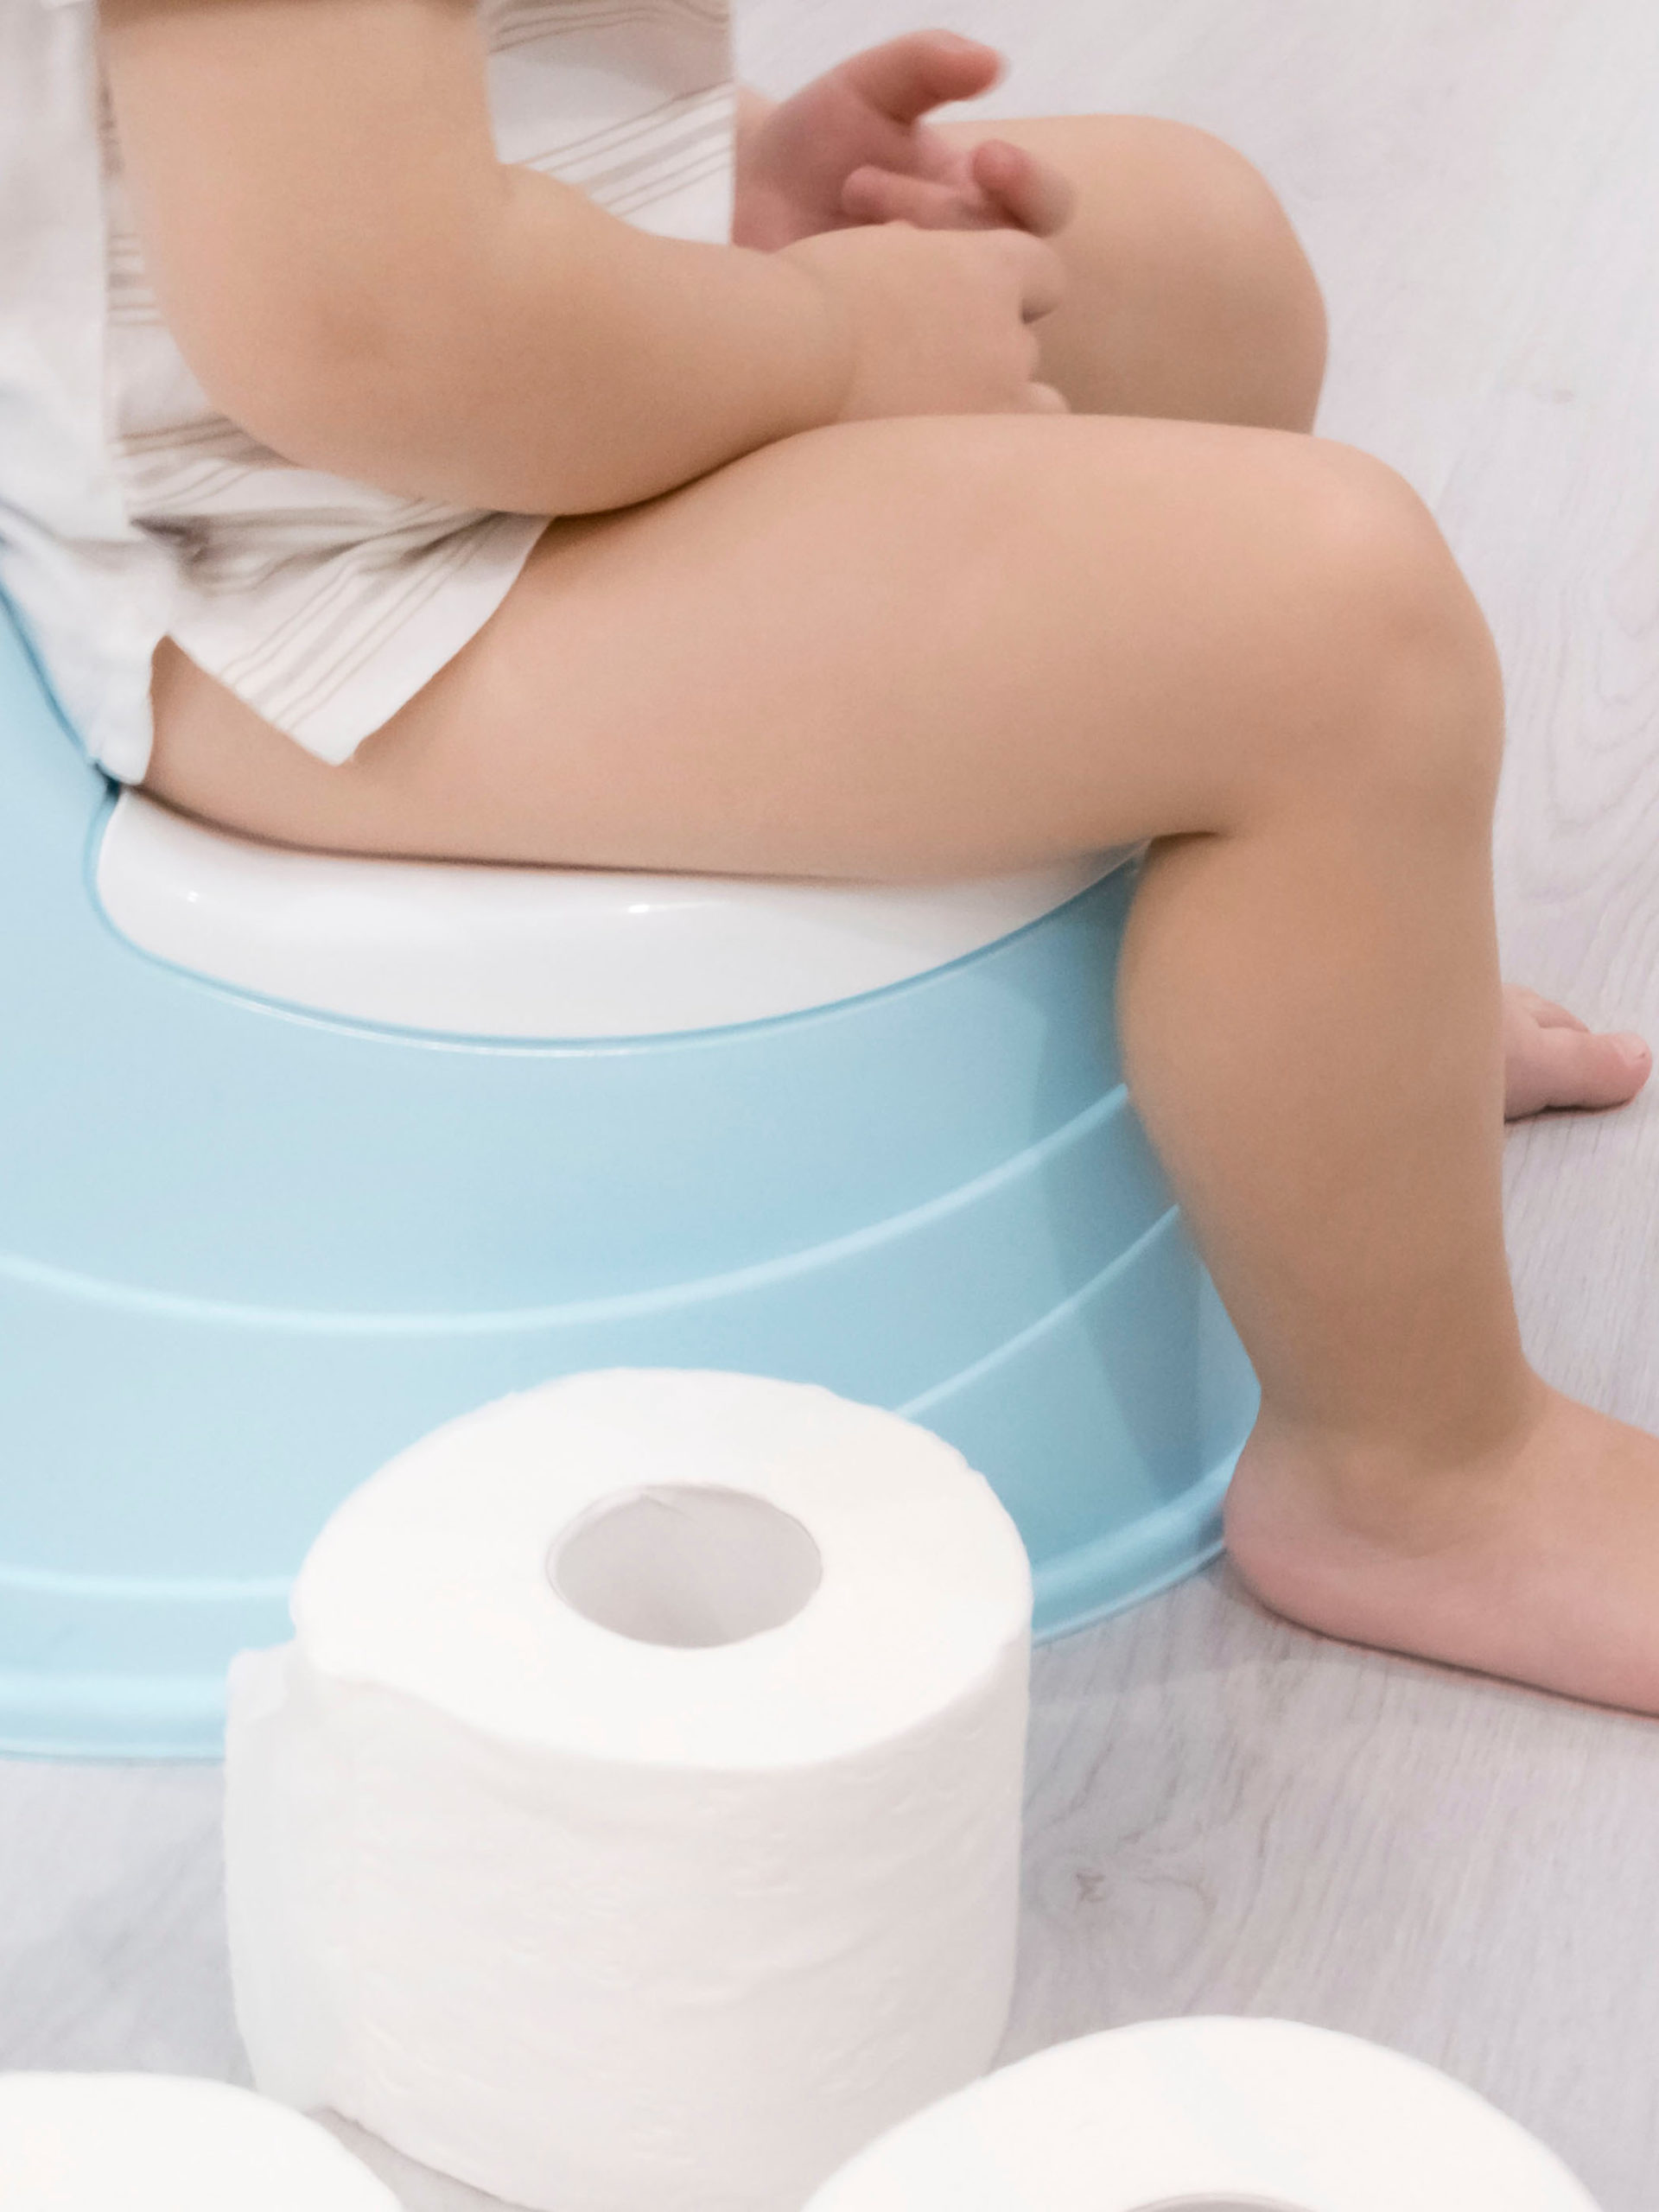 smiling baby sitting on potty with toilet paper rolls